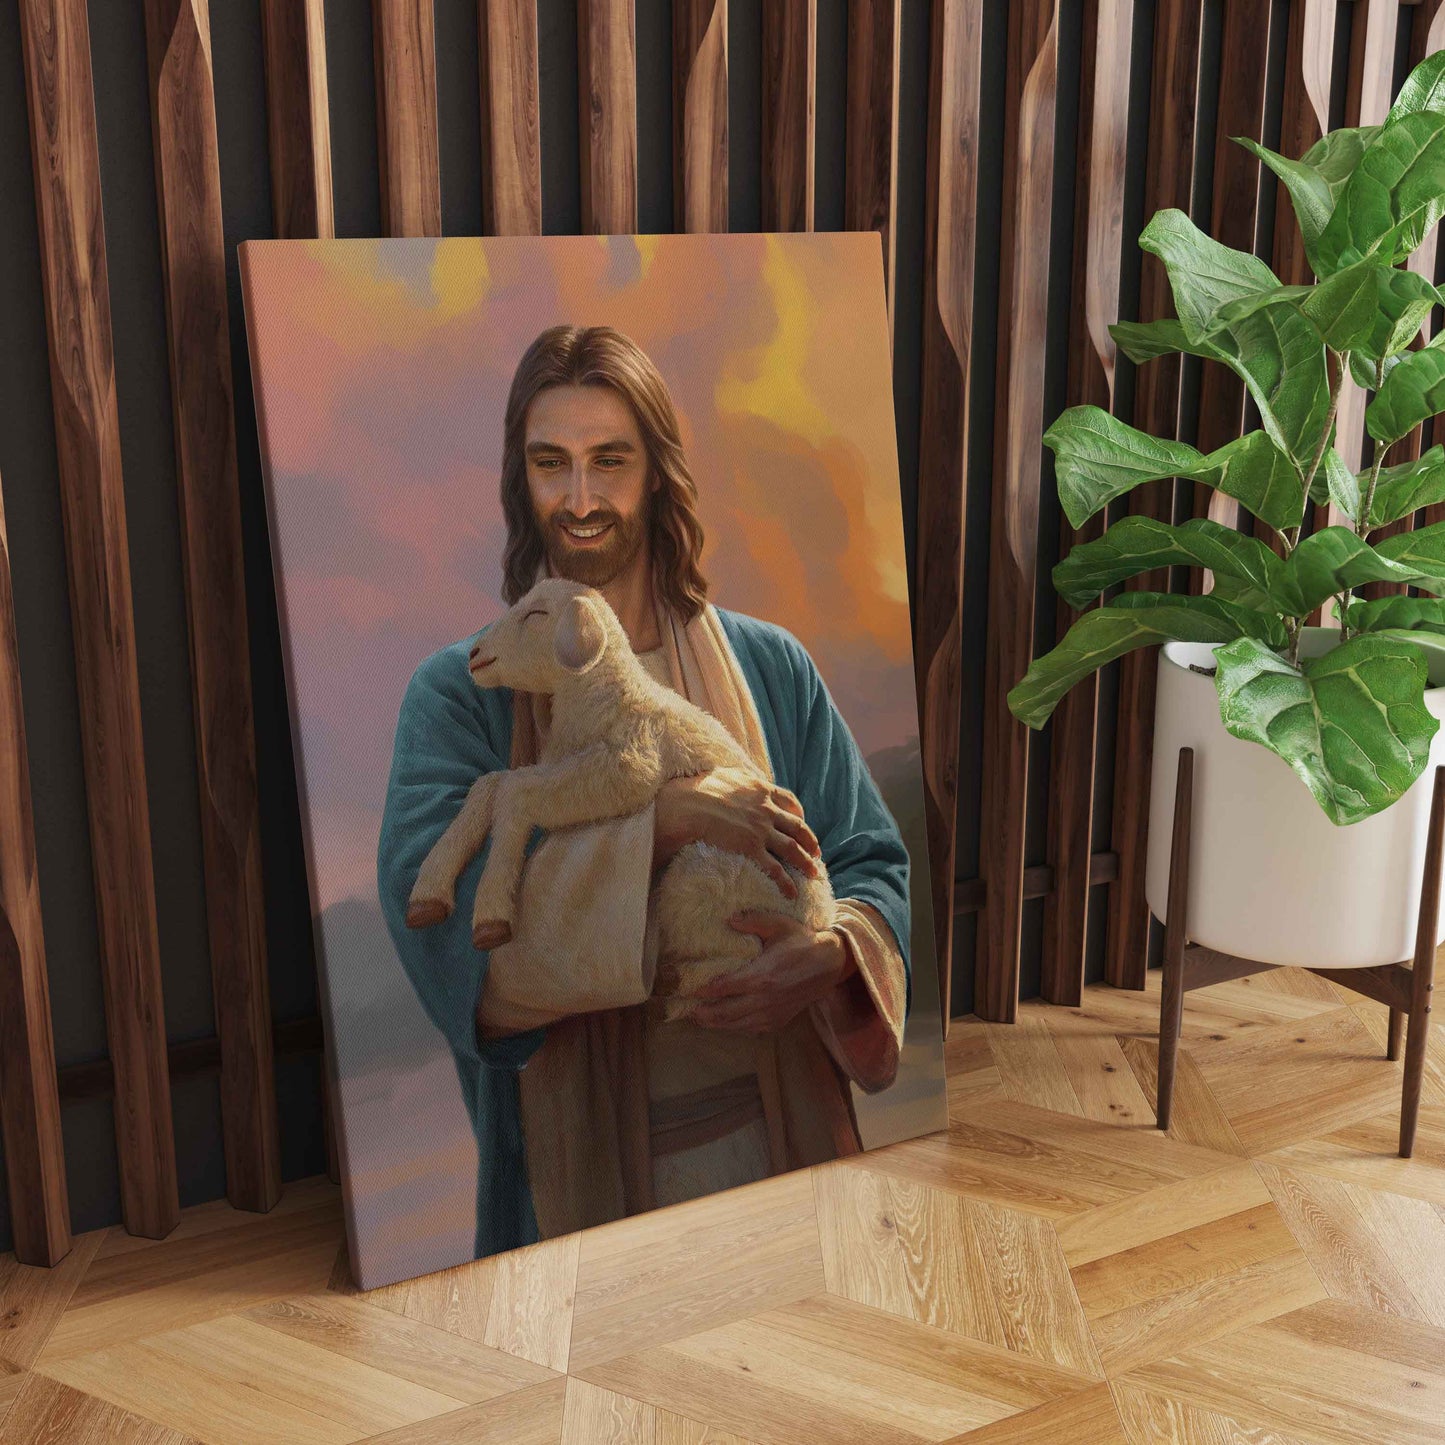 Sacred Guardian: A Divine Tribute to the Good Shepherd - Embrace the Compassion and Grace of Jesus in Wall Art - S05E33